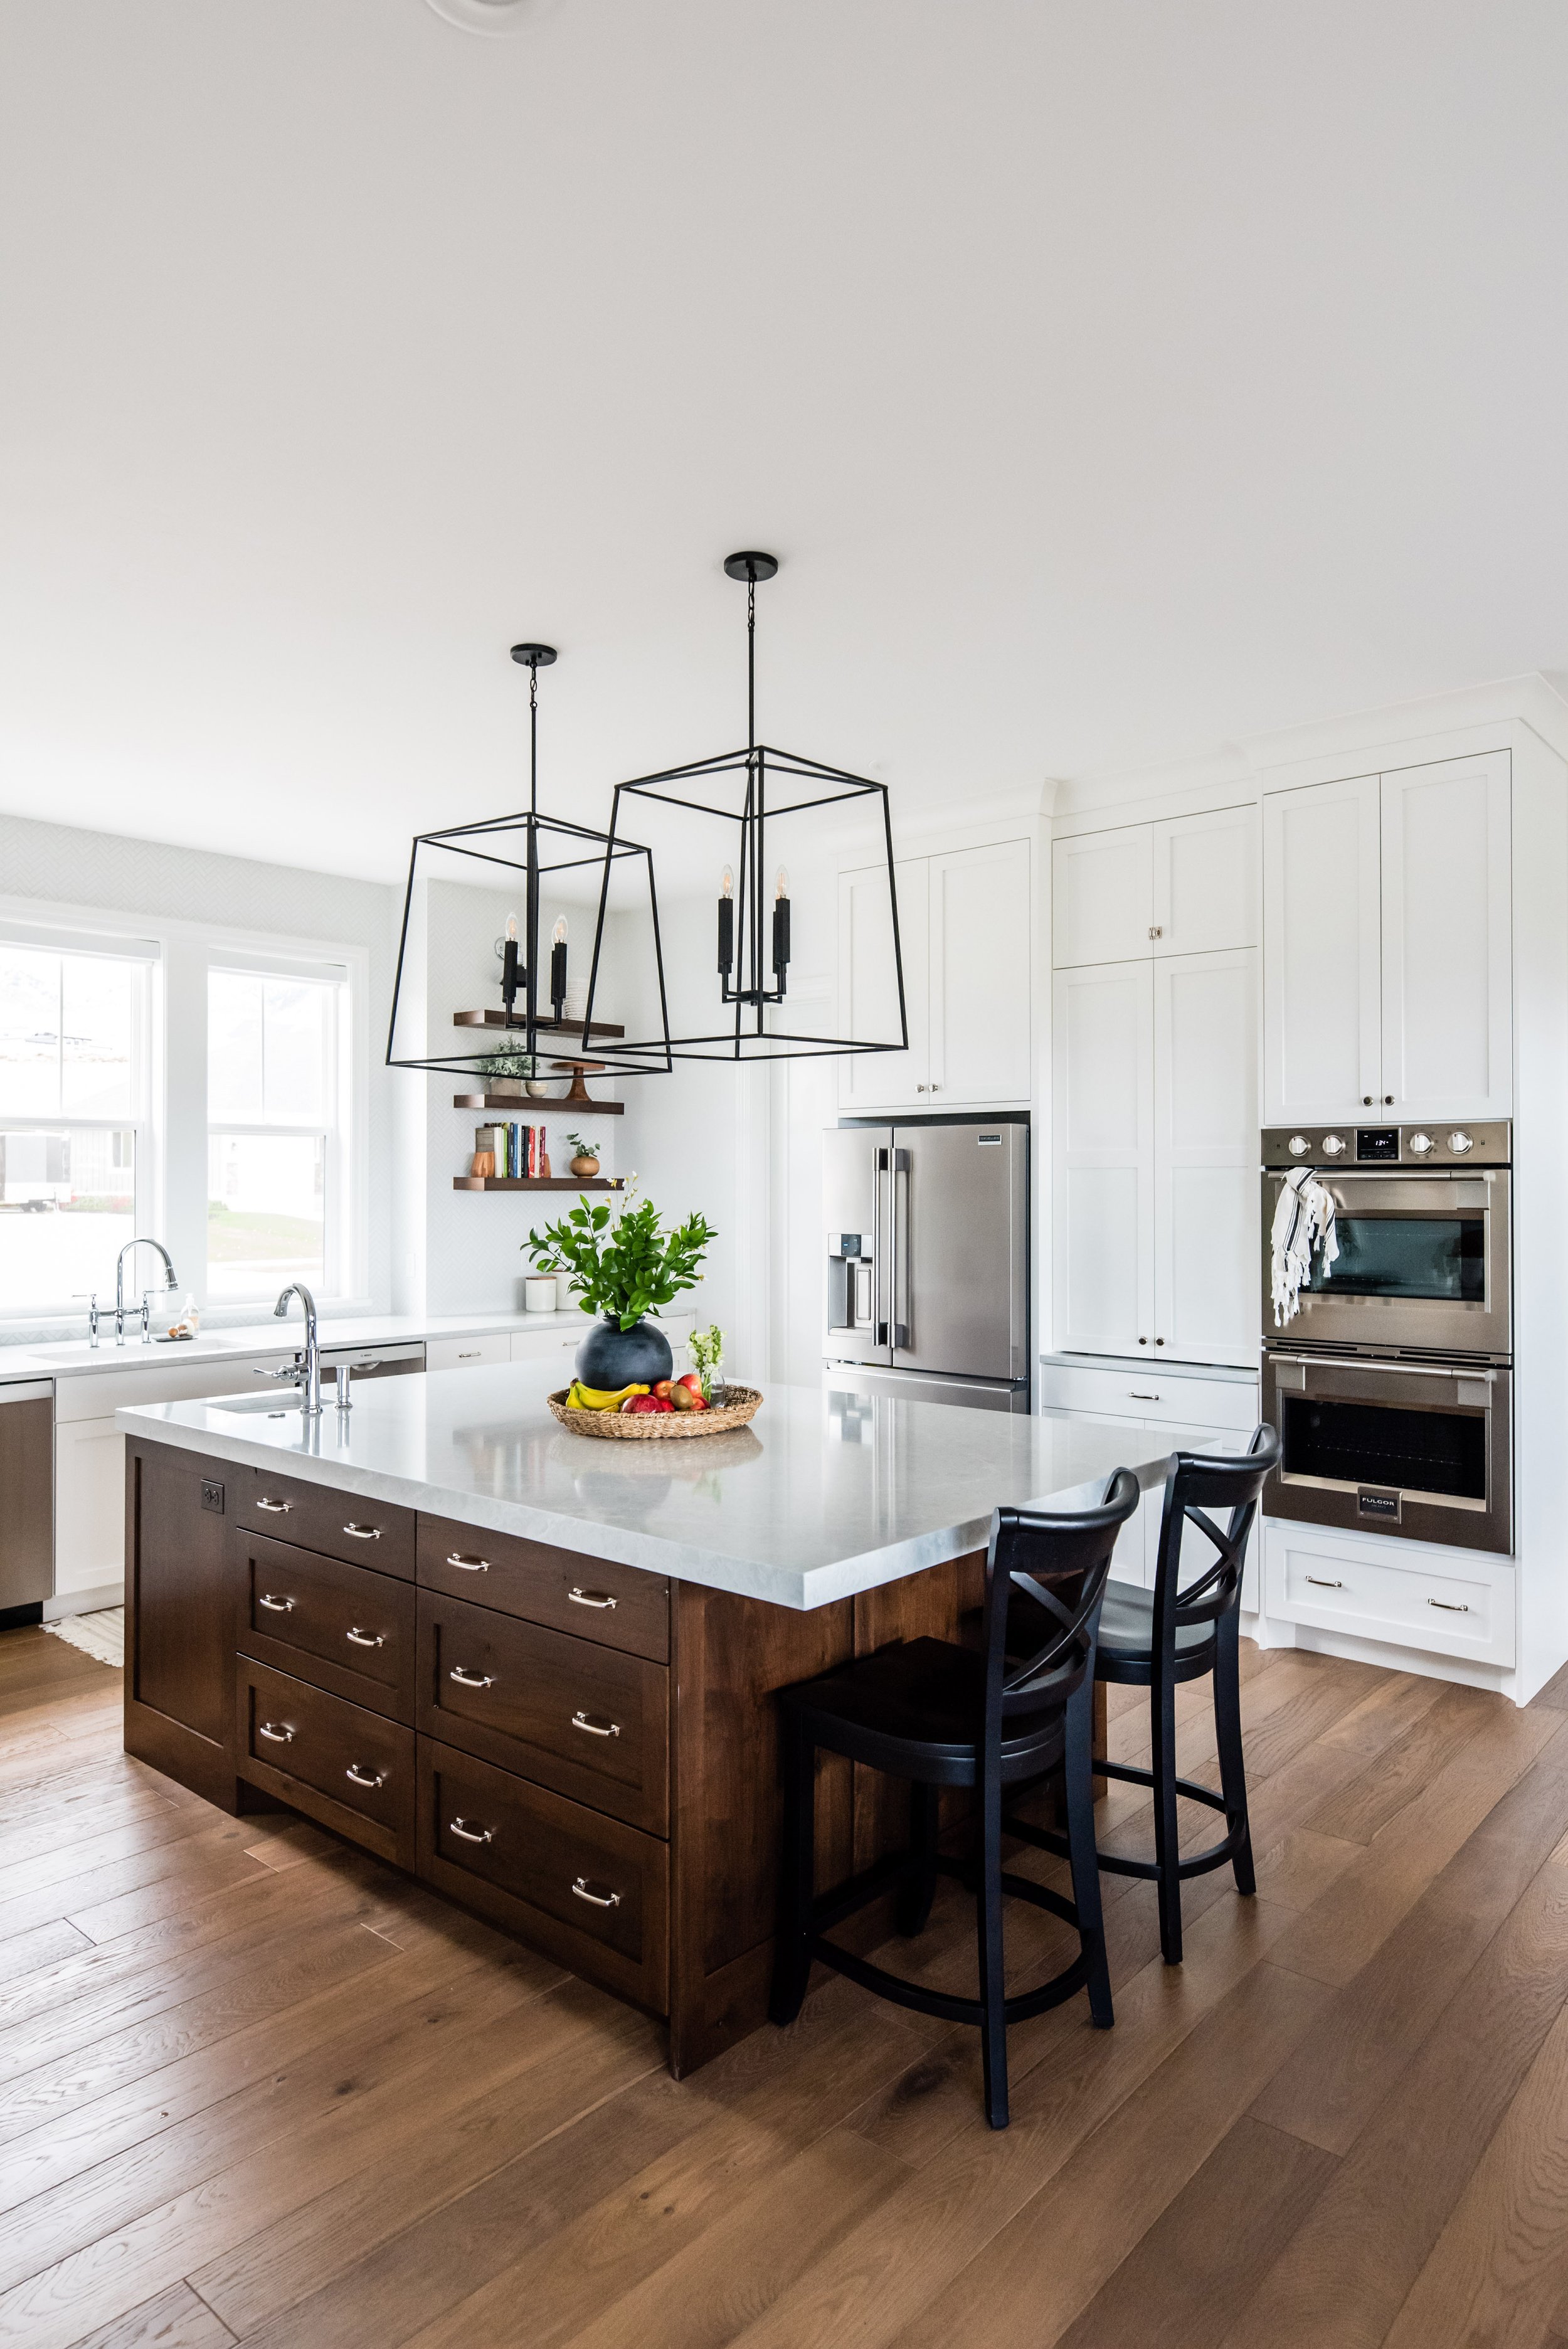  How to pick out the perfect kitchen counter for a modern house by Liz Powell Design. #LizPowellDesign #InteriorDesignUtah #InteriorDesigner #LizPowellDesign #InteriorDesignUtah #InteriorDesigner #buildingahome #countertops #dreamhome #interiors #kit